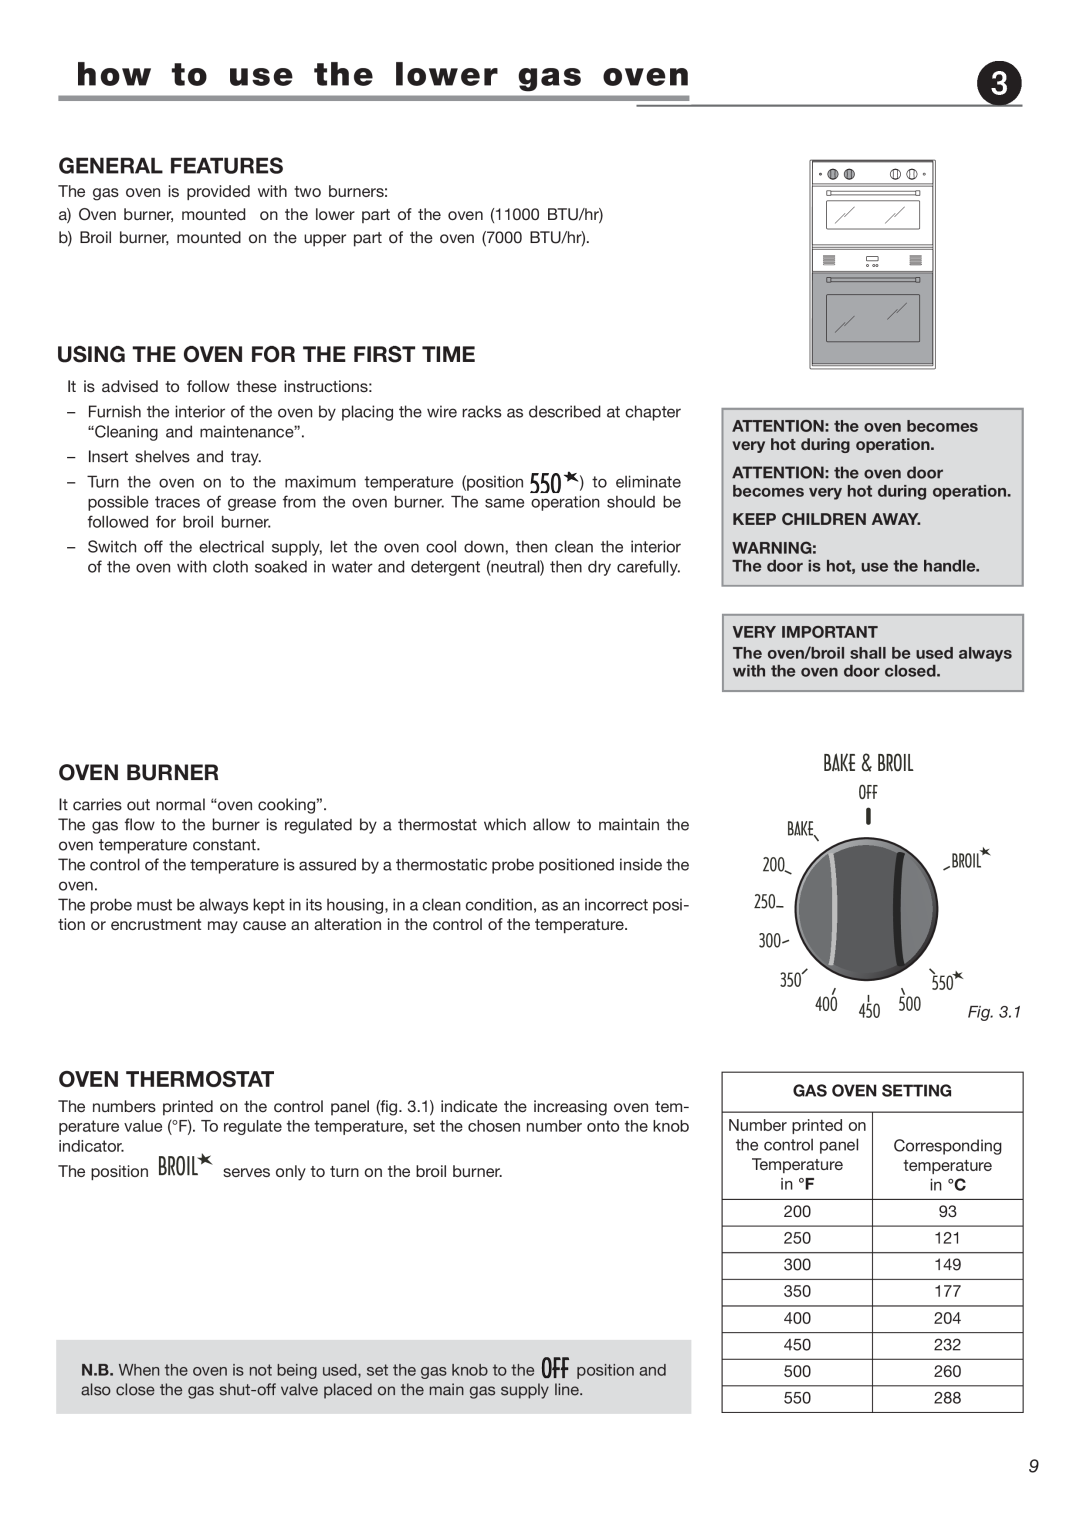 DeLonghi DEBIGE 2440 W how to use the lower gas oven, General Features, Using The Oven For The First Time, Oven Burner 